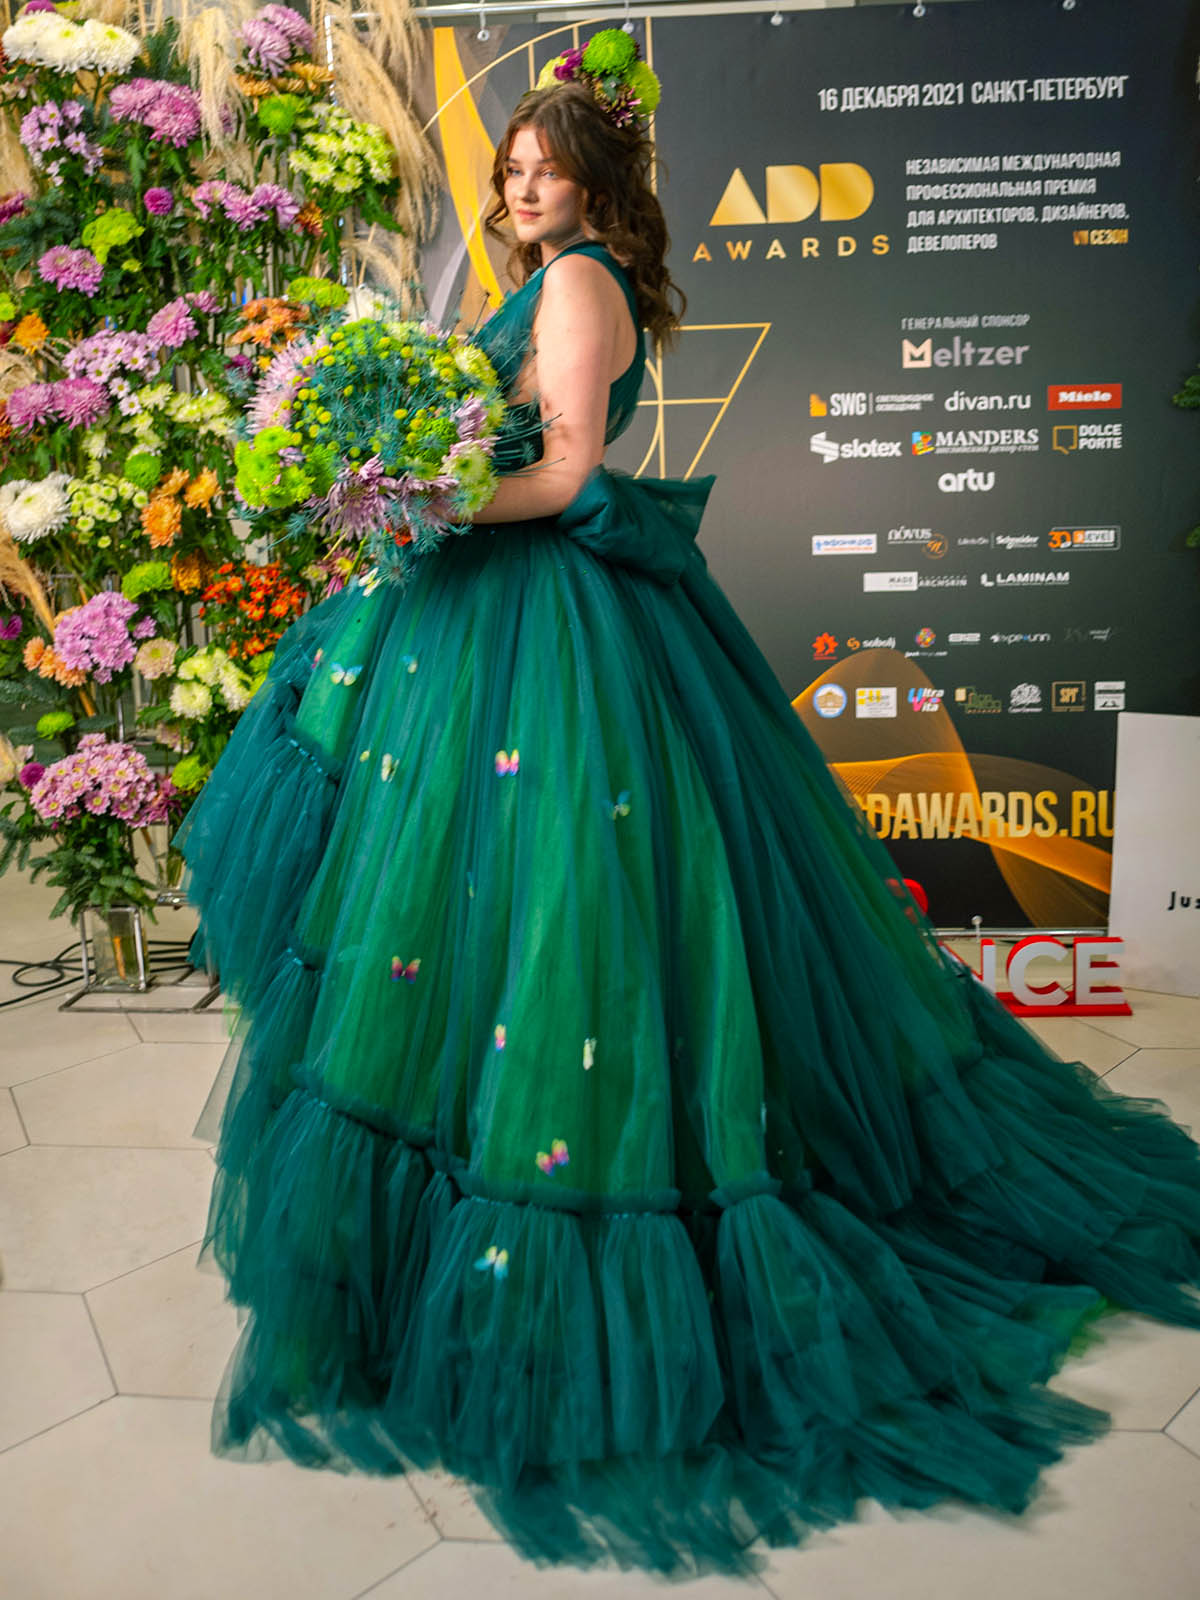 Trends From Different Worlds Meet in St. Petersburg at the 2021 ADD Awards